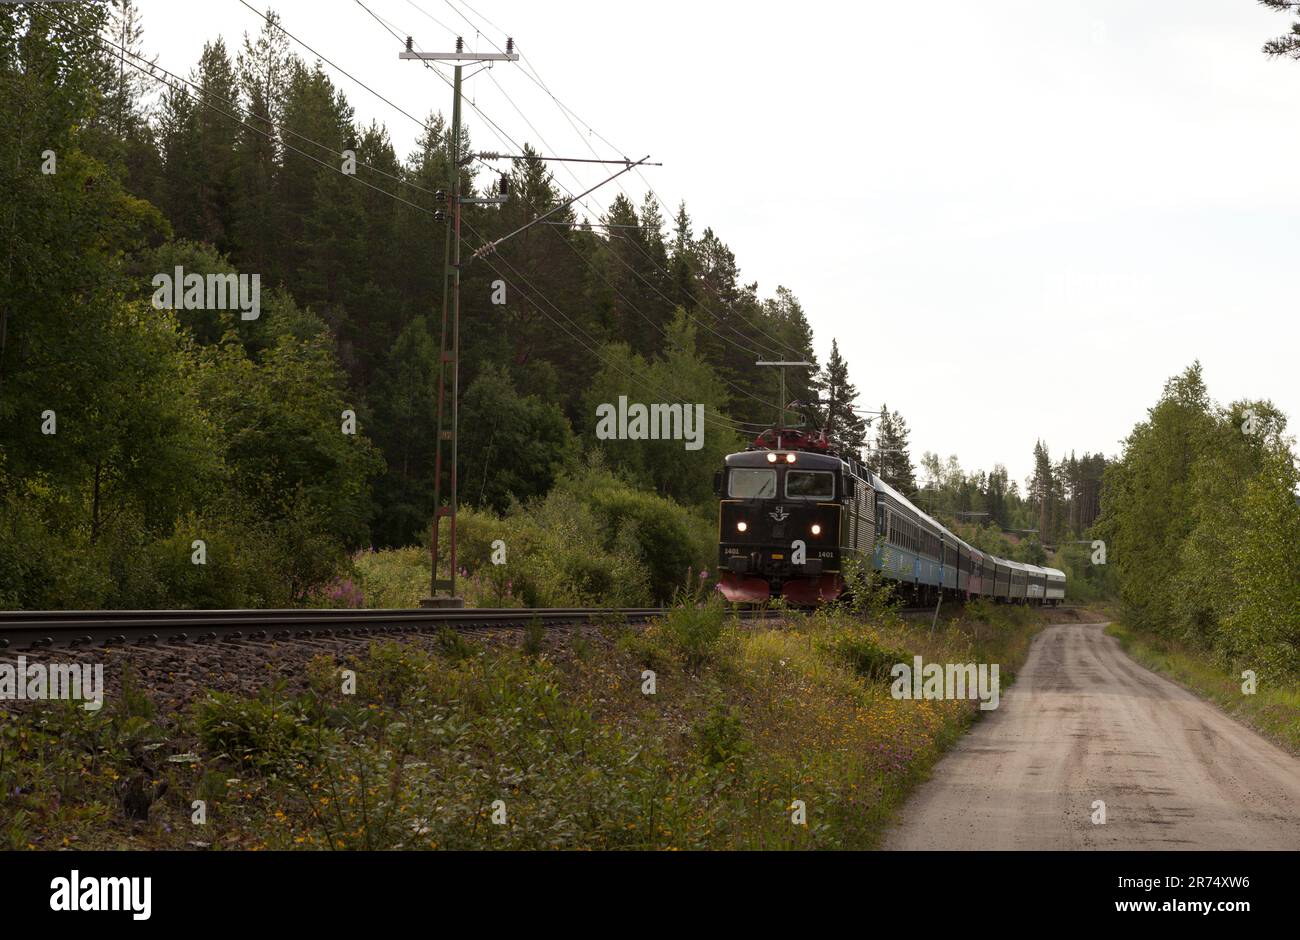 BRUNFLO, SWEDEN ON AUGUST 07, 2015. High-Speed State Company, SJ crosses the forest landscape. Gravel road, Editorial use. Stock Photo